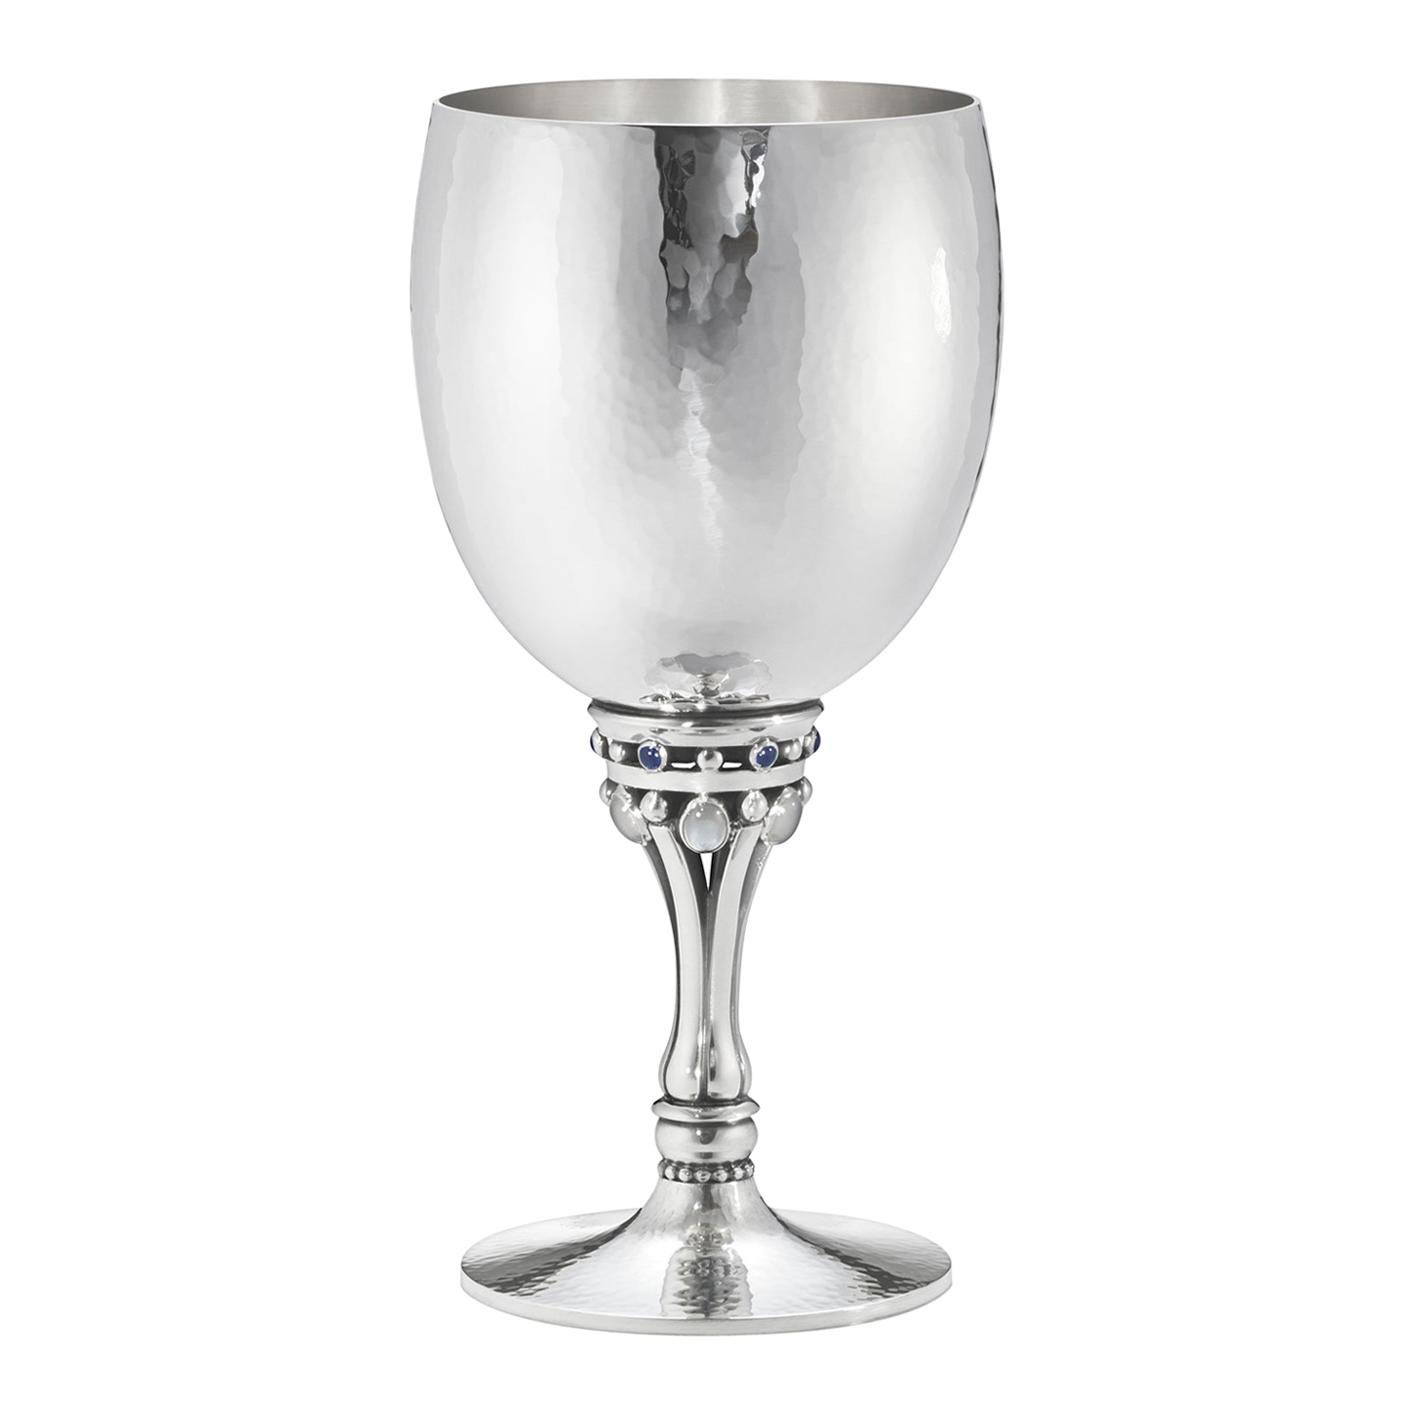 Georg Jensen 532C Sterling Silver Goblet with Stone Detail by Harald Nielsen